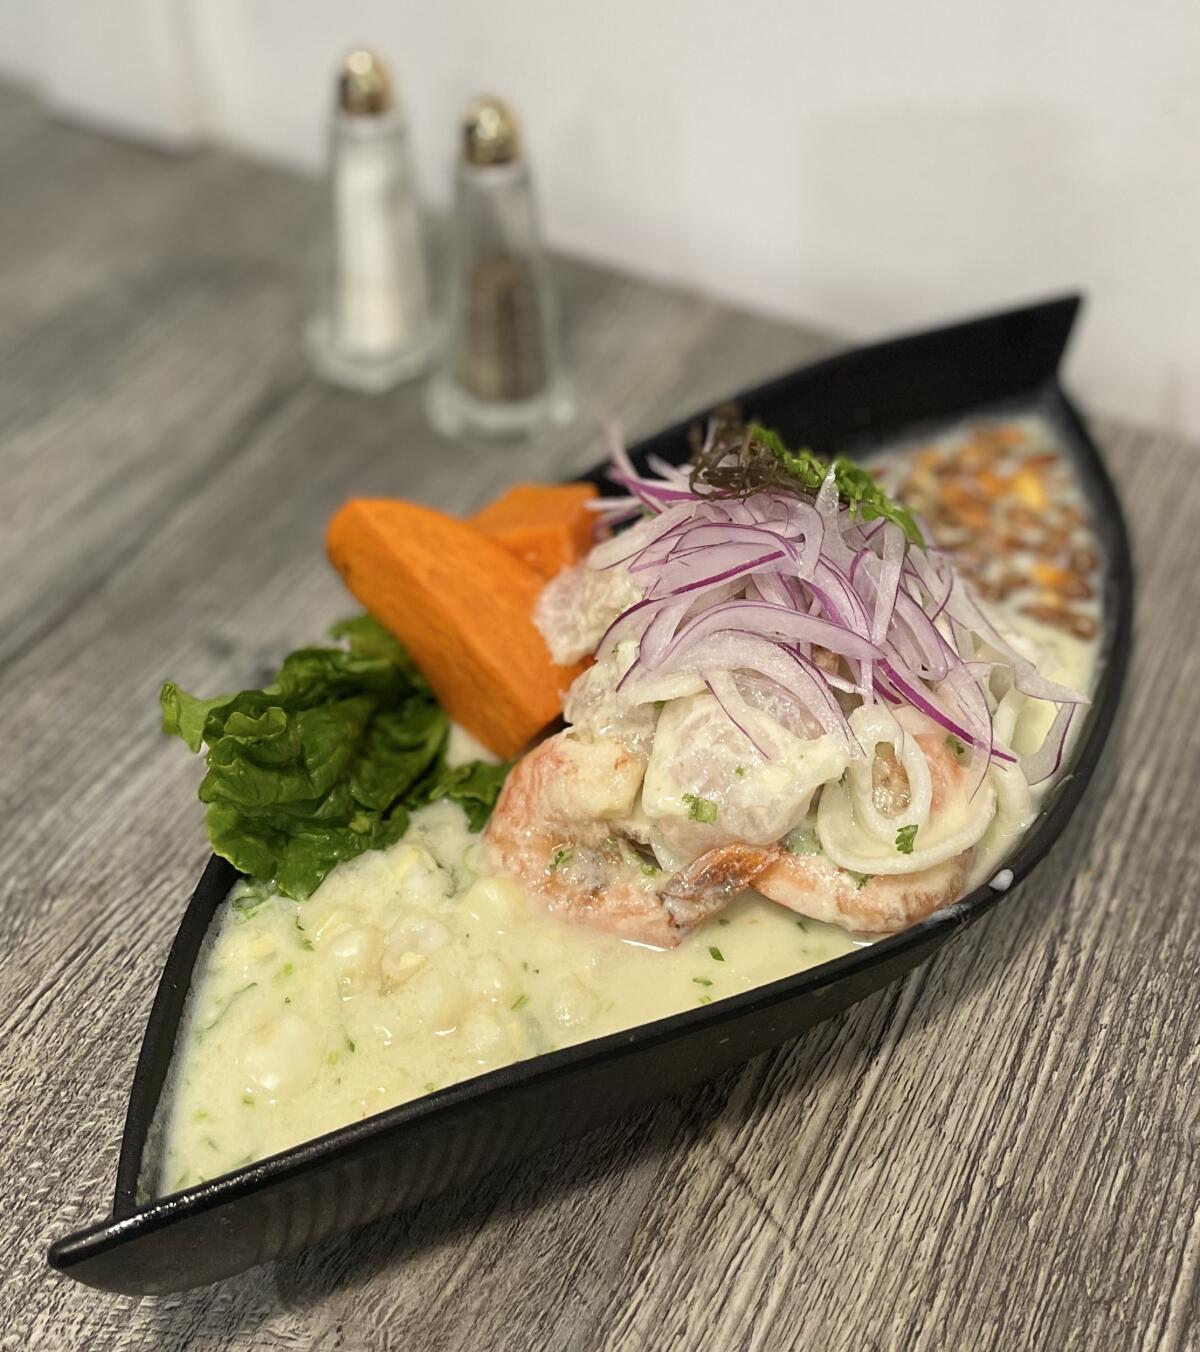 Ceviche 19’s Ceviche Mixto features fish, squid and shrimp cooked in citrus juice dressing.